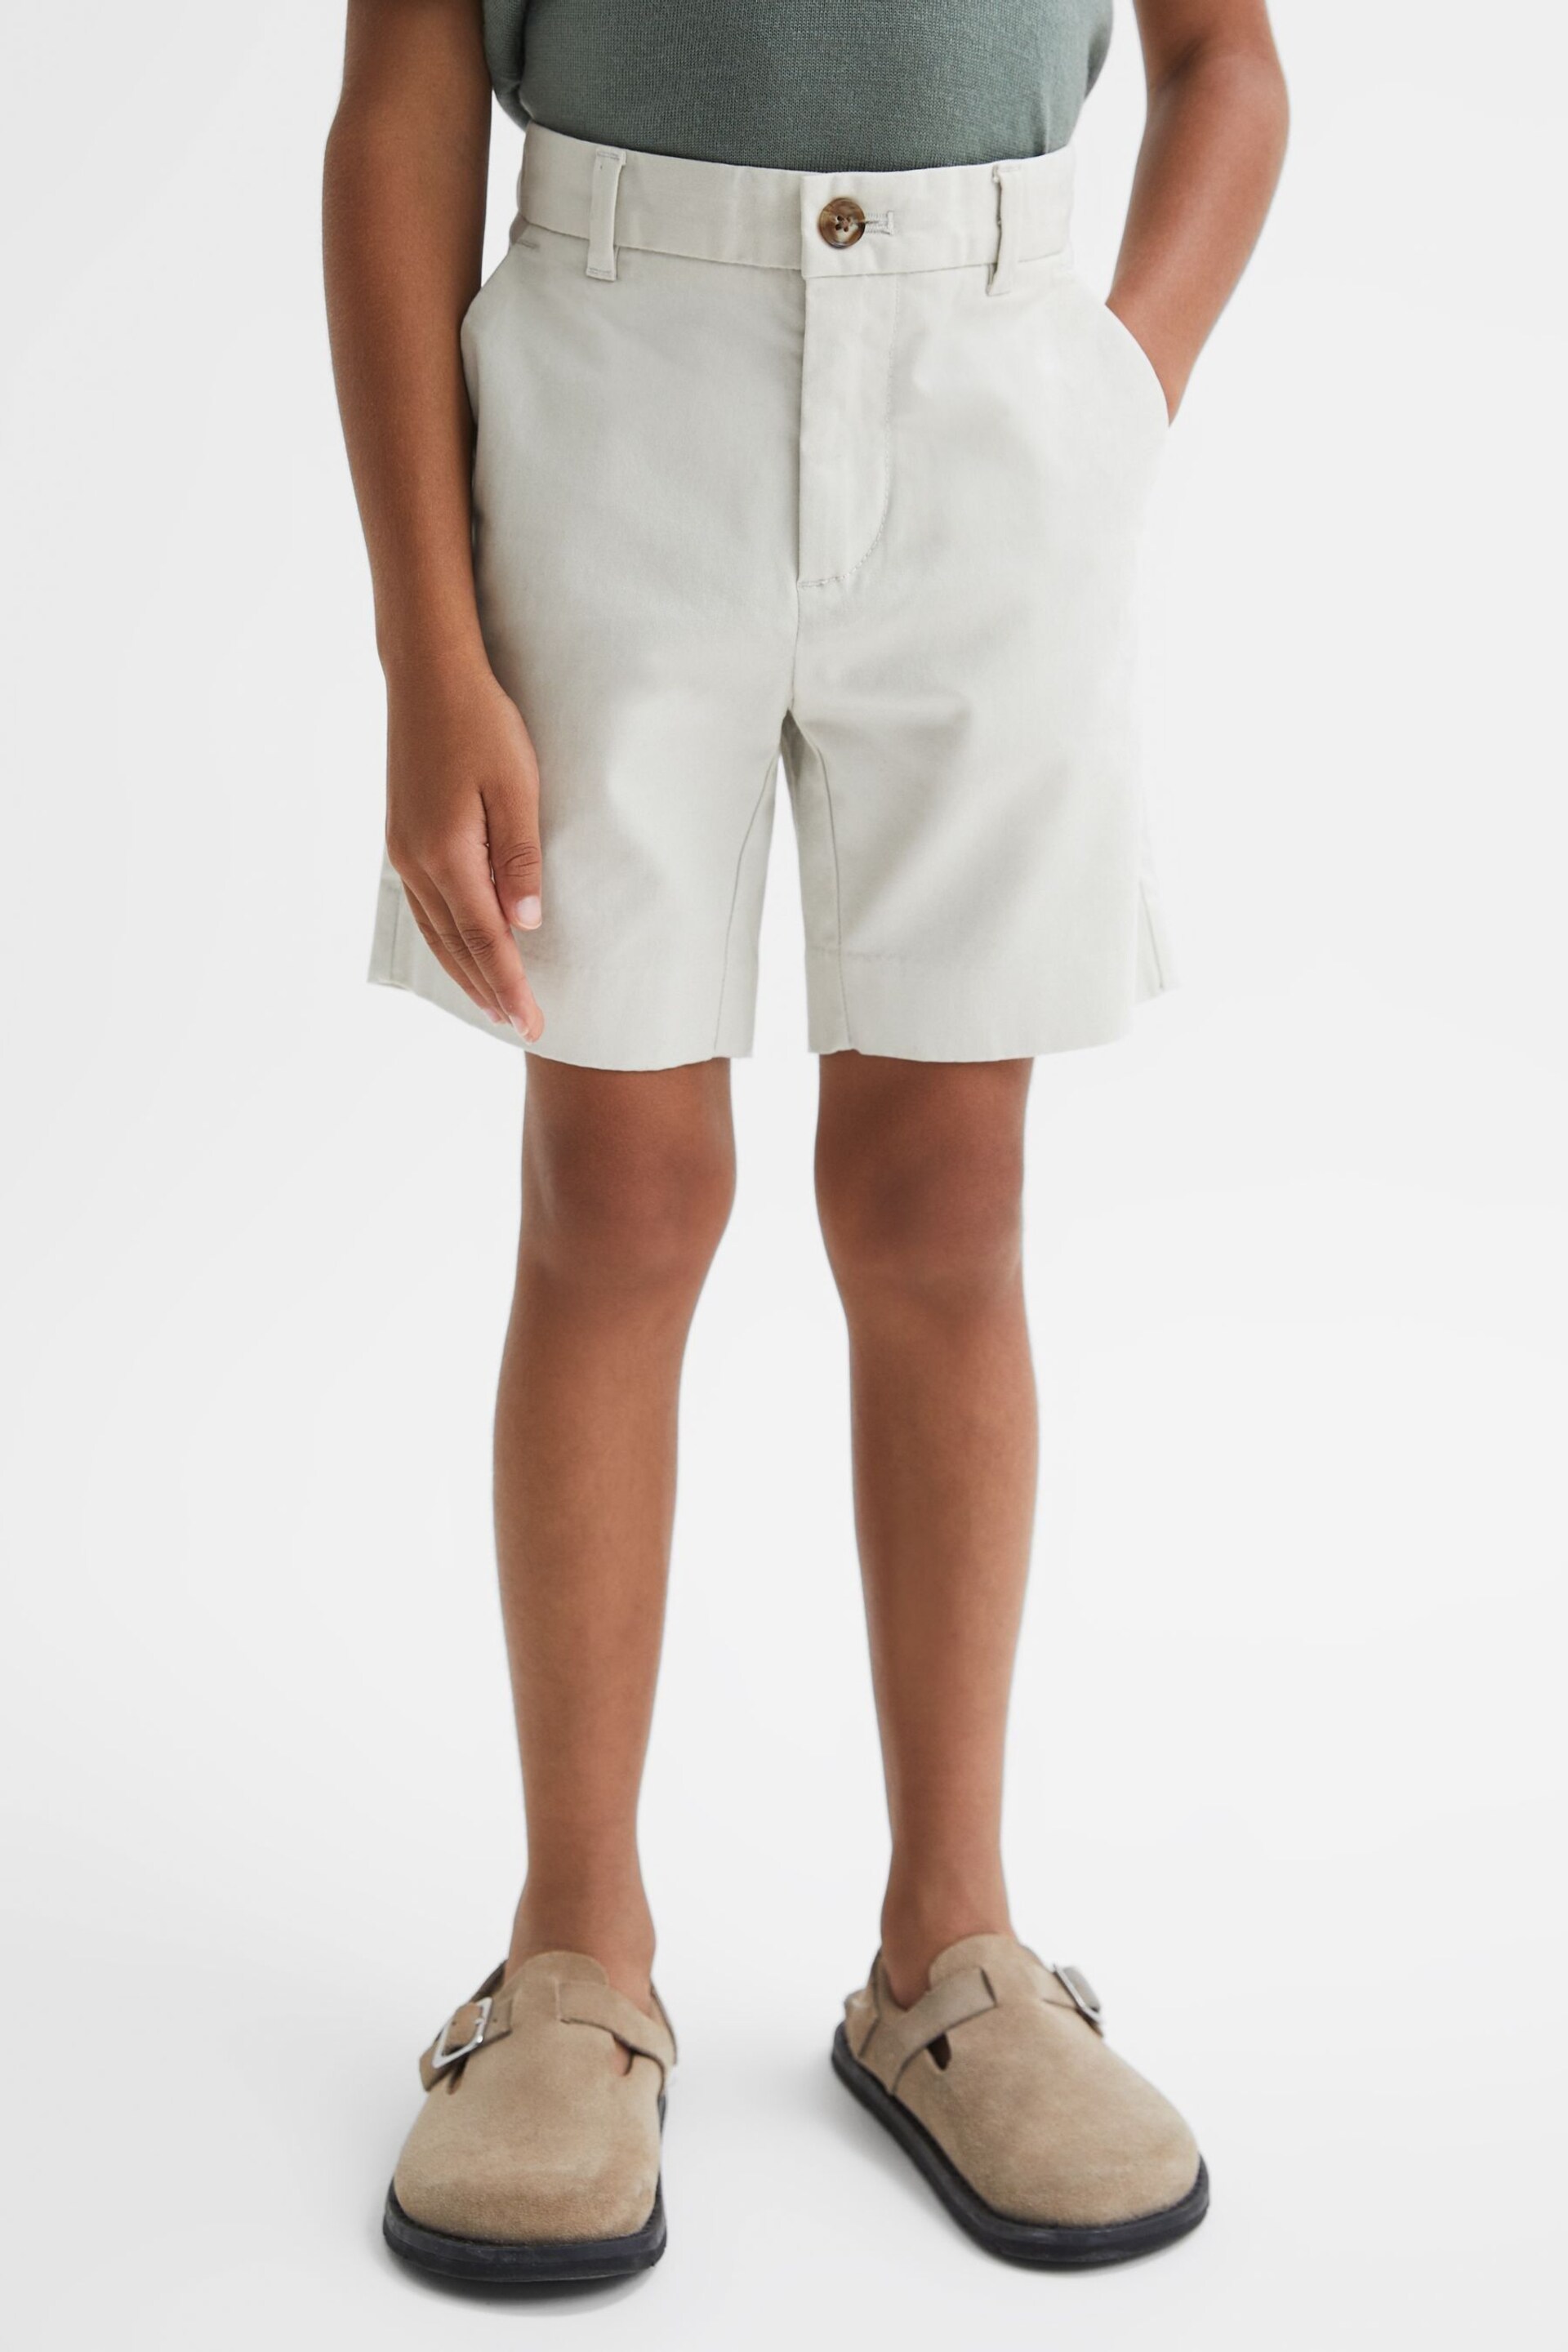 Reiss Chalk Wicket Junior Casual Chino Shorts - Image 1 of 6